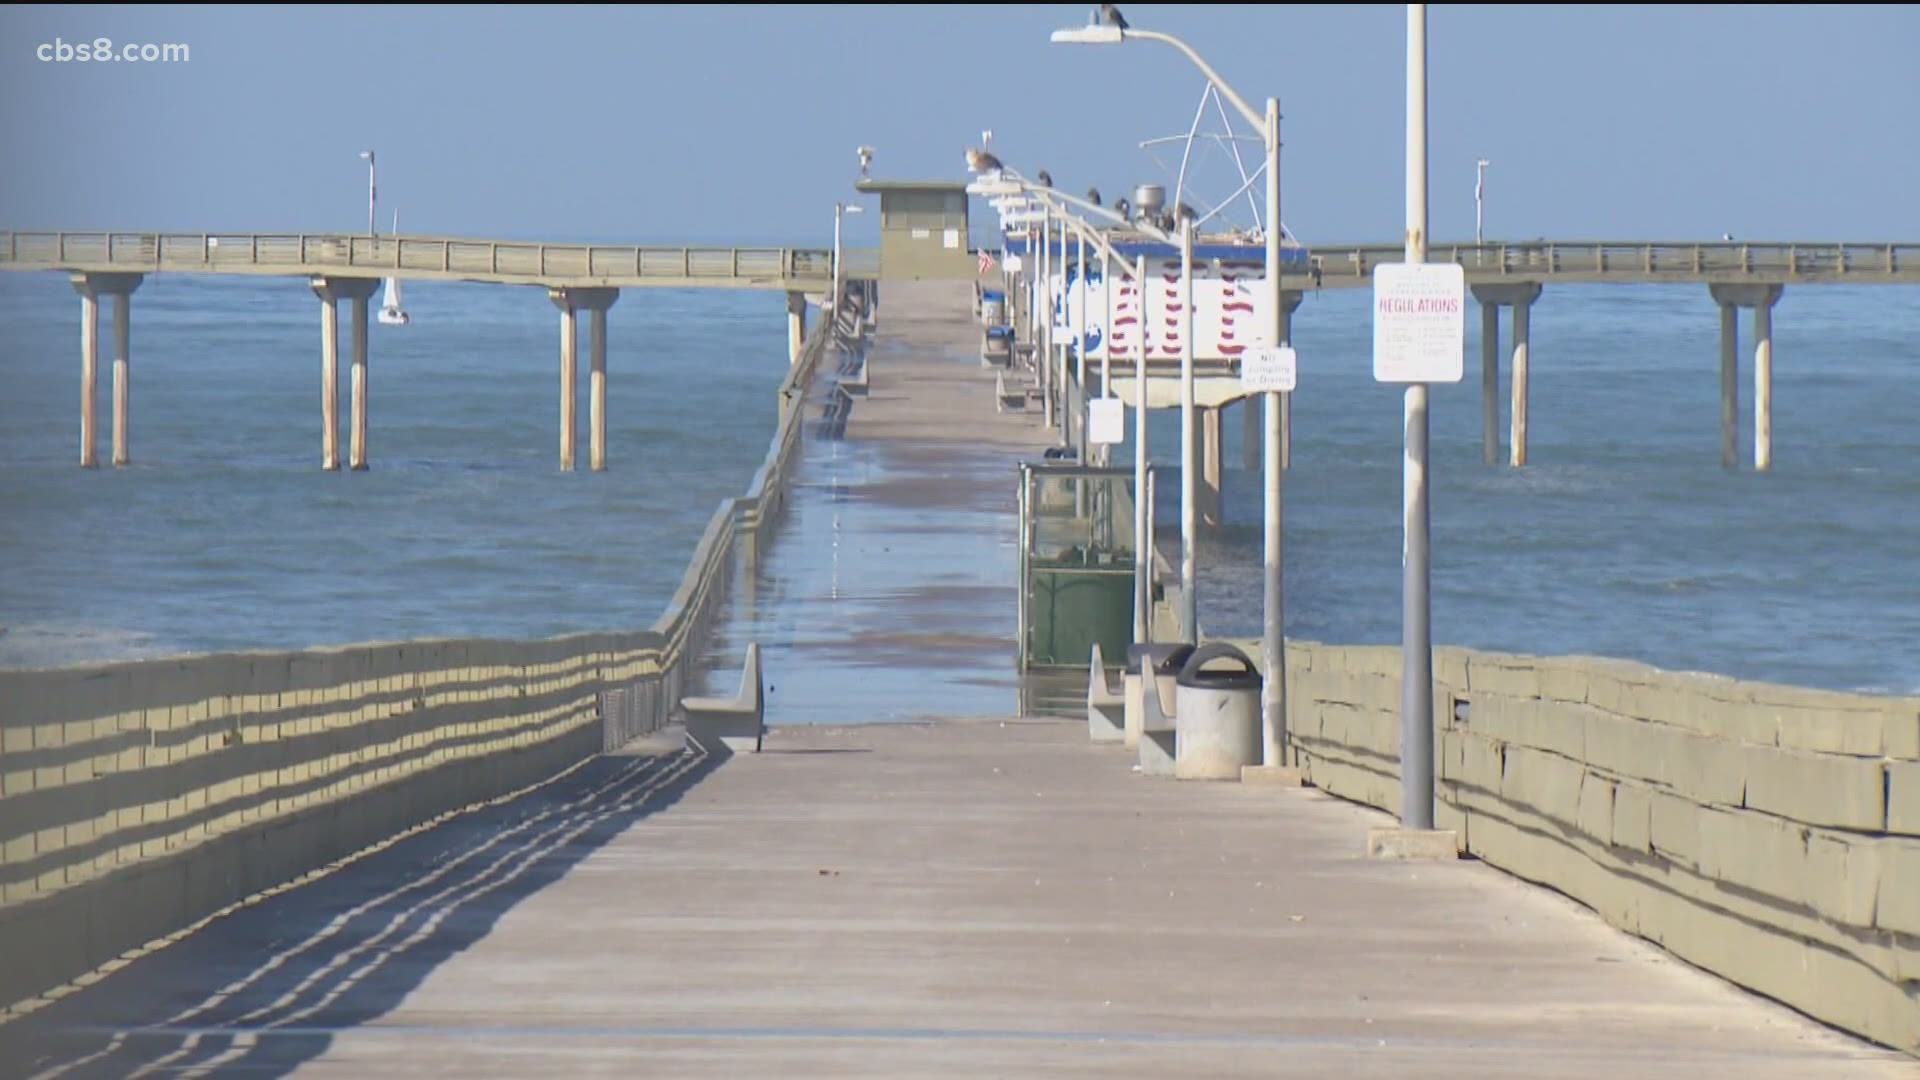 The pier has had a ticking clock since the city completed an inspection in 2019 and found it had "reached the end of its service life."